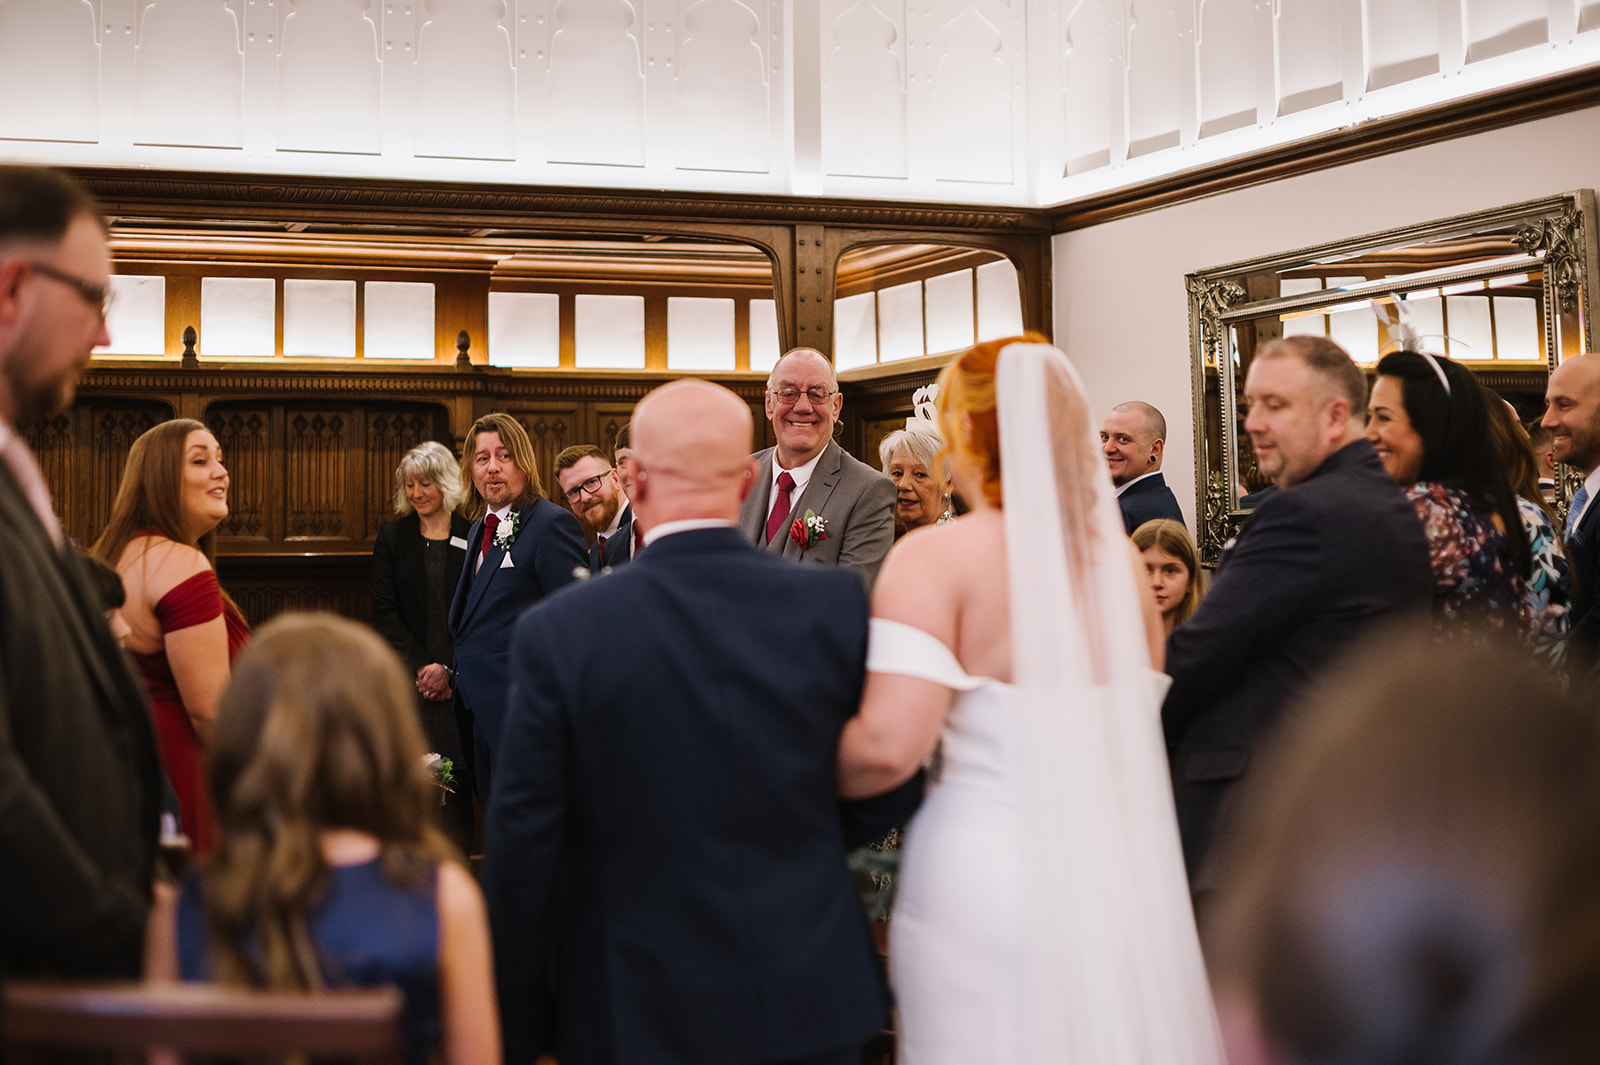 Kerri and Pawl had a full metal wedding at Pendrell Hall in Wolverhampton with their kids, family, friends and bandmates